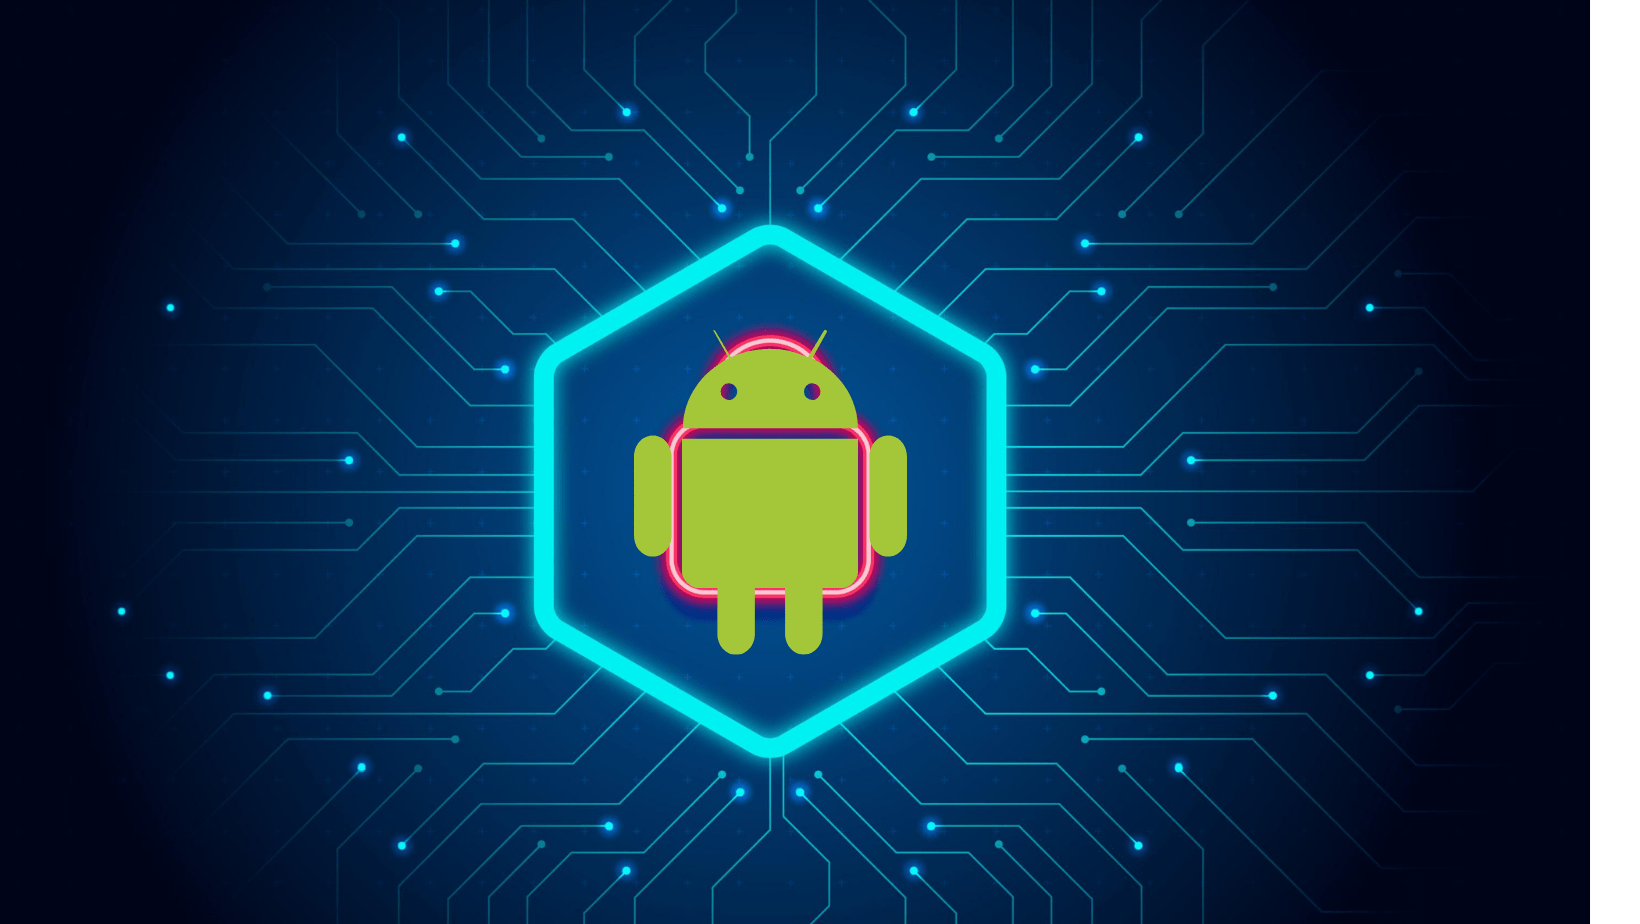 Android malware BRATA strikes again with new dangerous capabilities